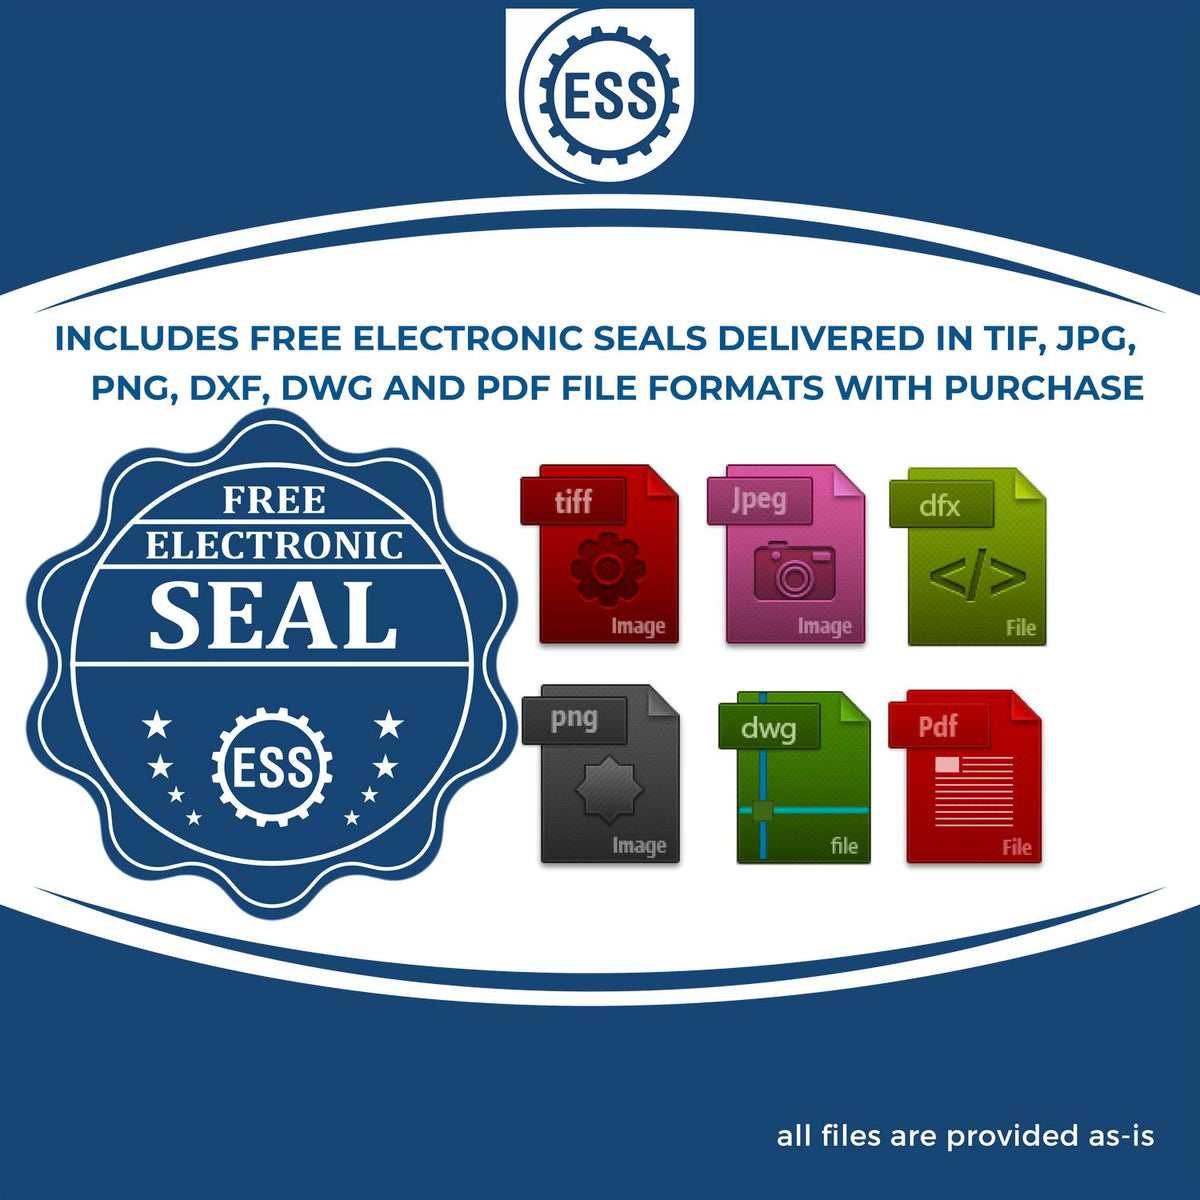 An infographic for the free electronic seal for the Premium MaxLight Pre-Inked Georgia Landscape Architectural Stamp illustrating the different file type icons such as DXF, DWG, TIF, JPG and PNG.